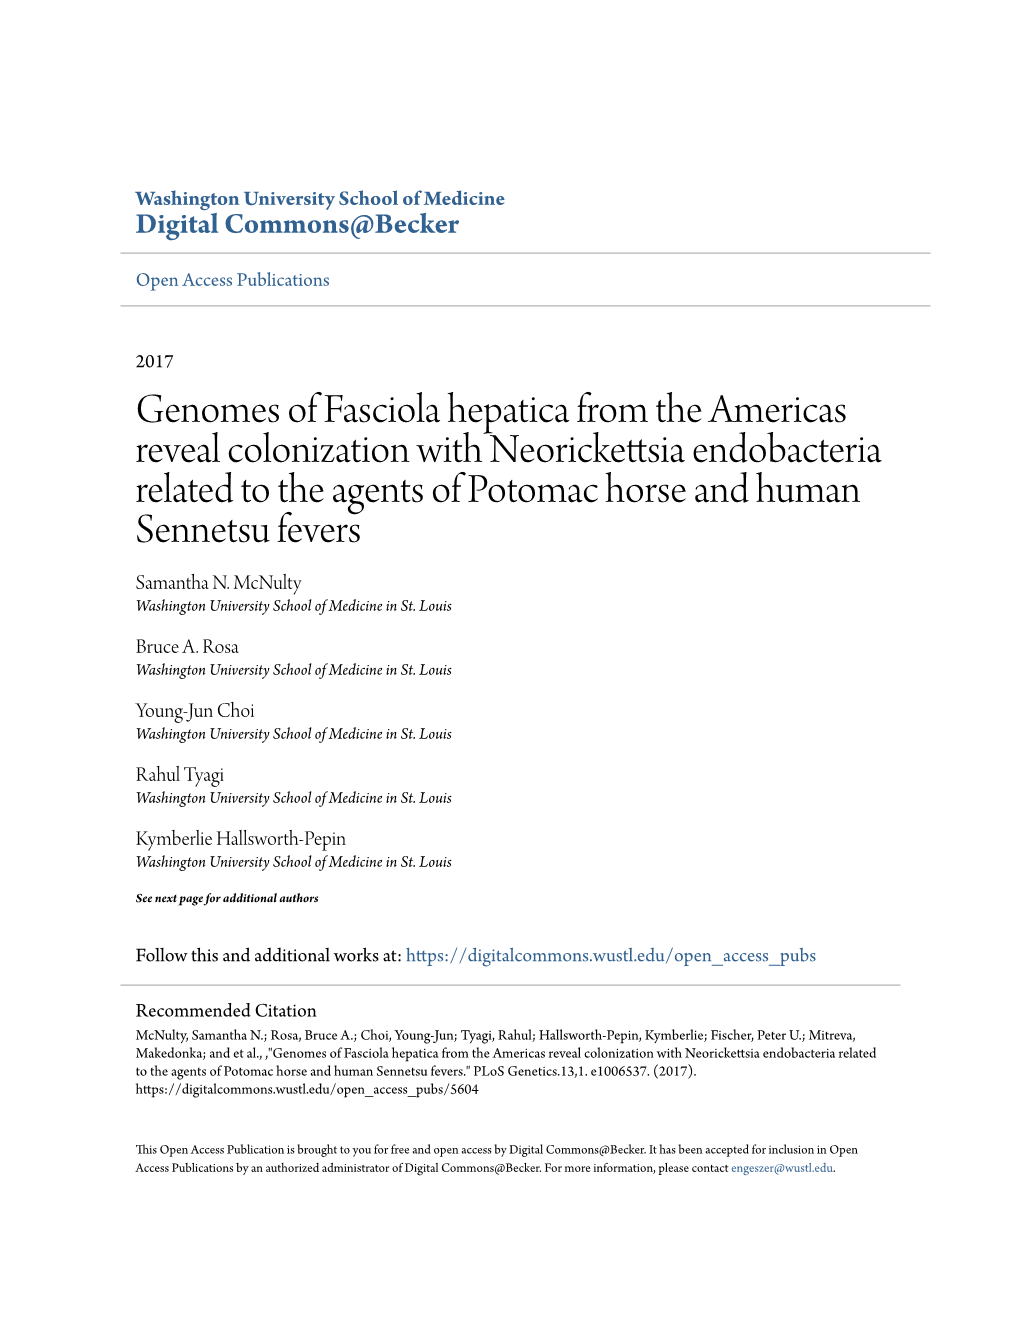 Genomes of Fasciola Hepatica from The